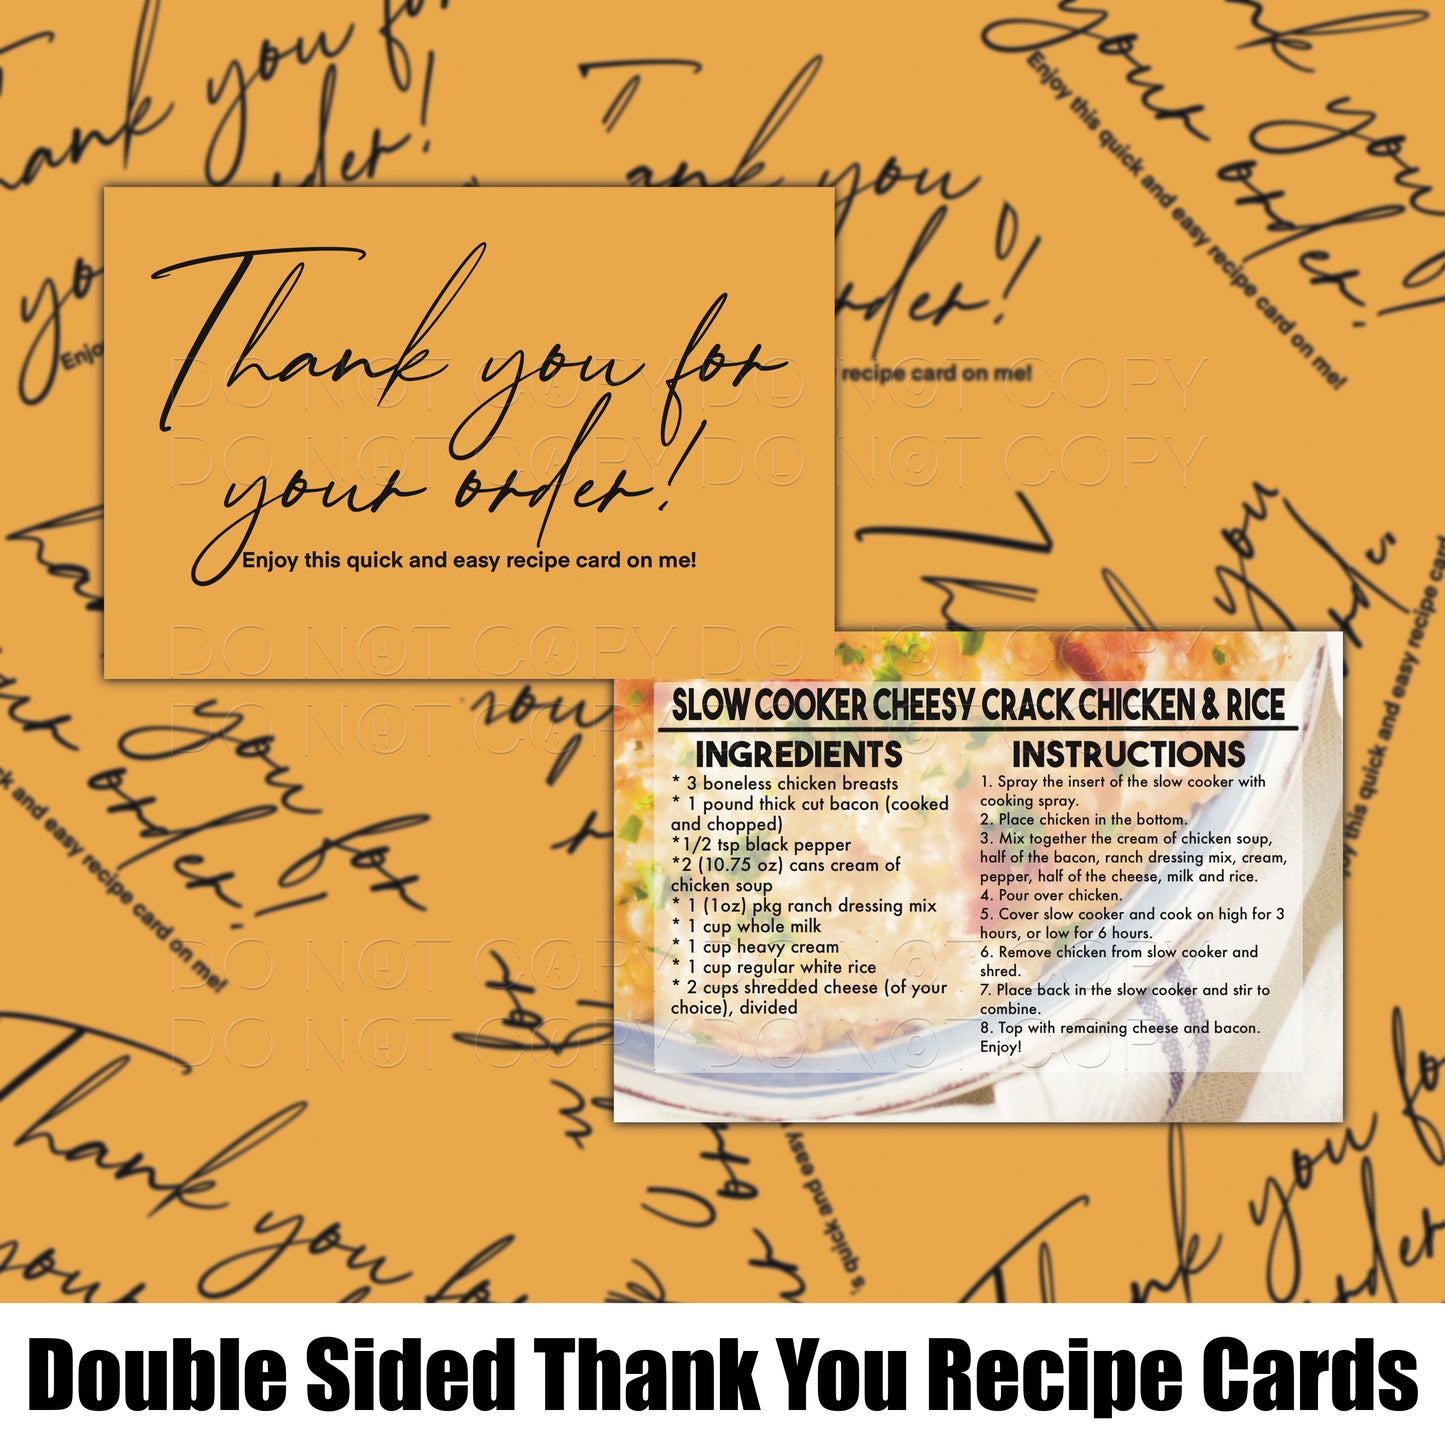 RECIPE THANK YOU CARDS - PACK OF 50 - CHEESY CRACK CHICKEN ON RICE #4012